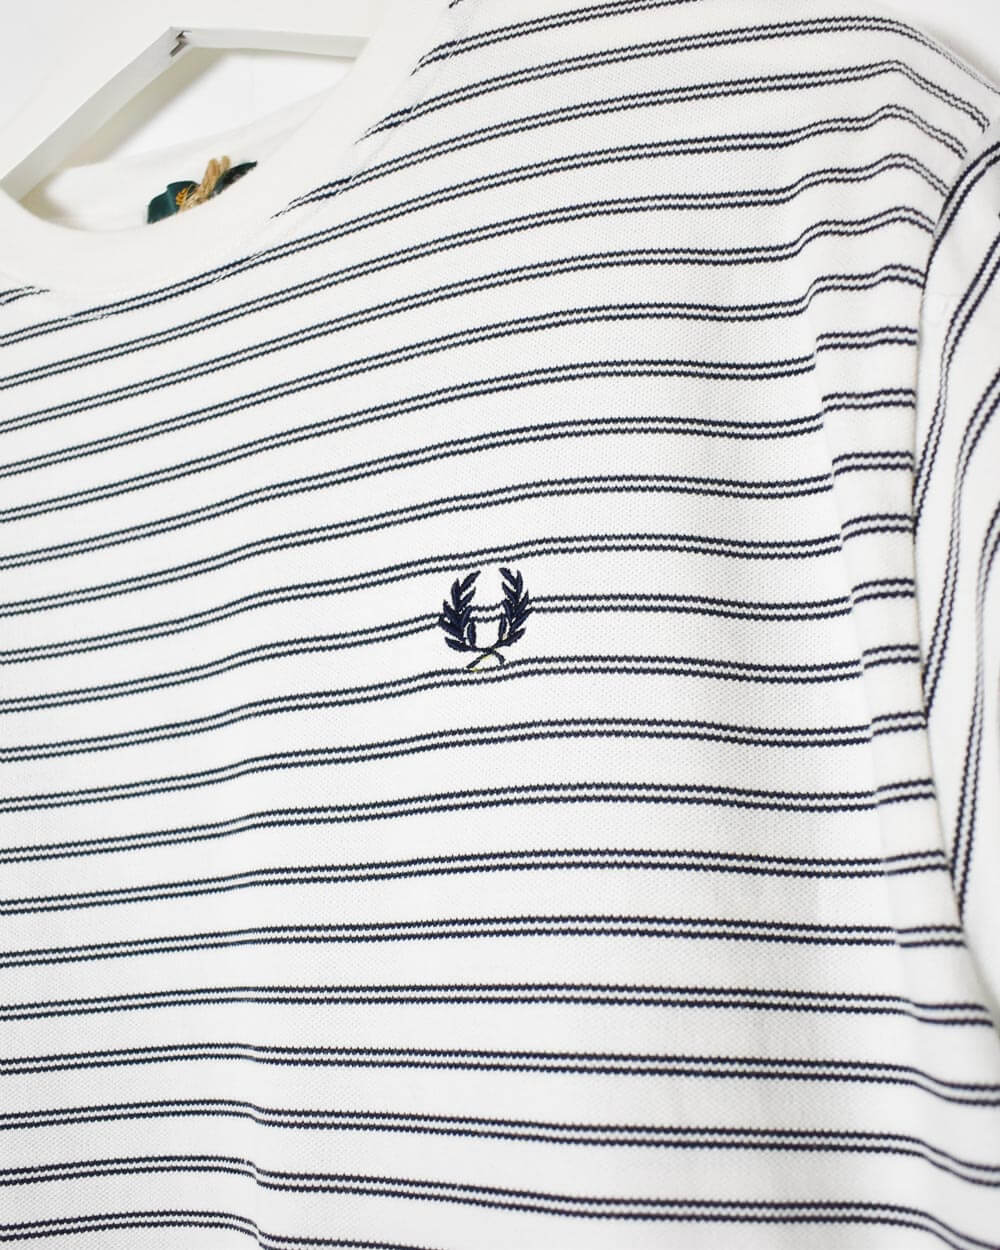 White Fred Perry T-Shirt - Small